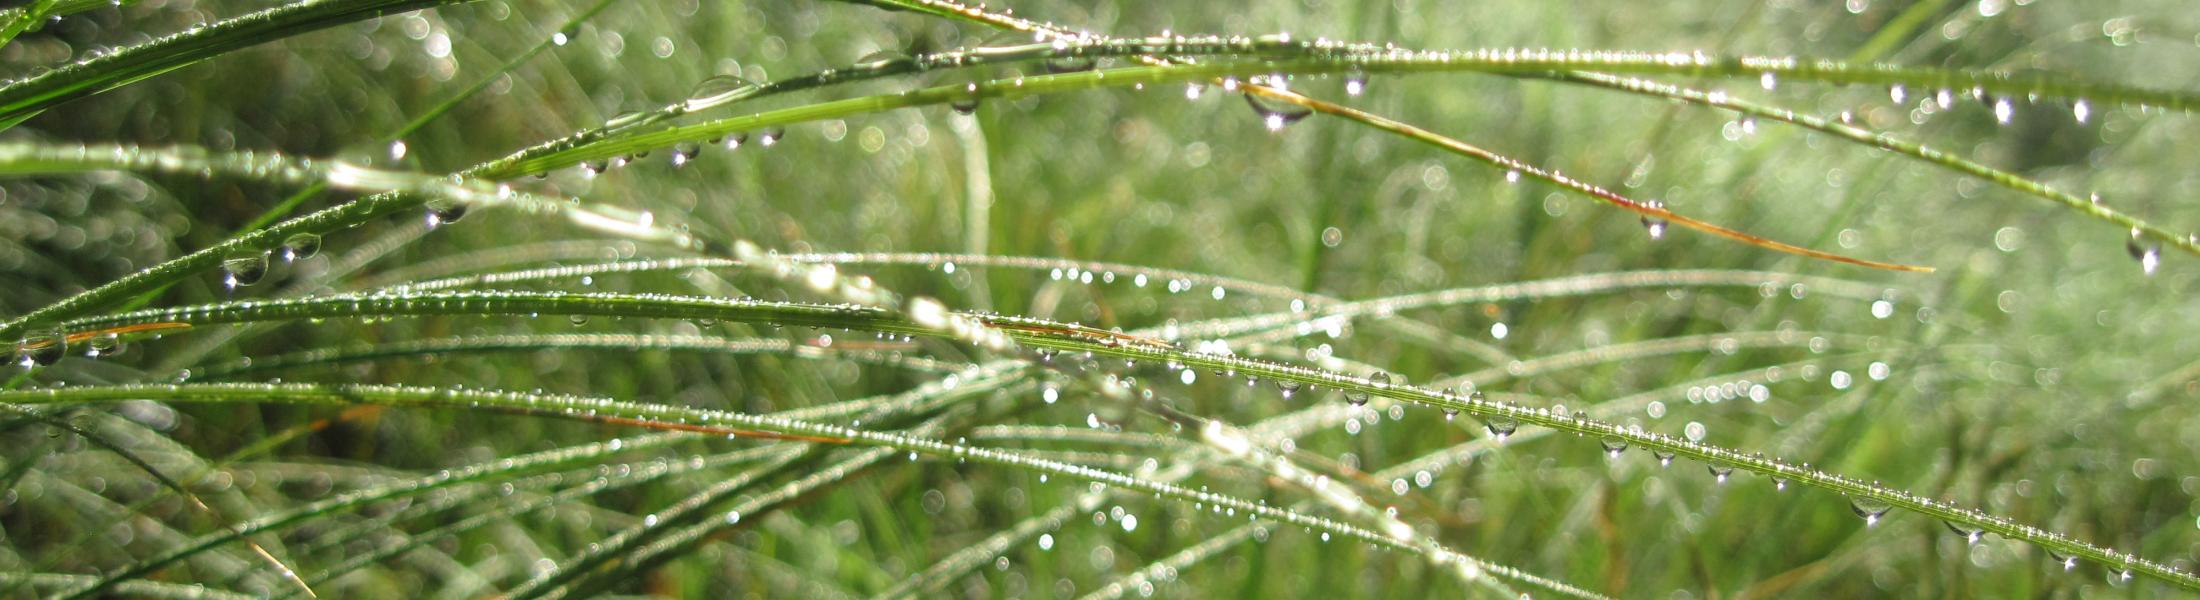 Grass with dewdrops